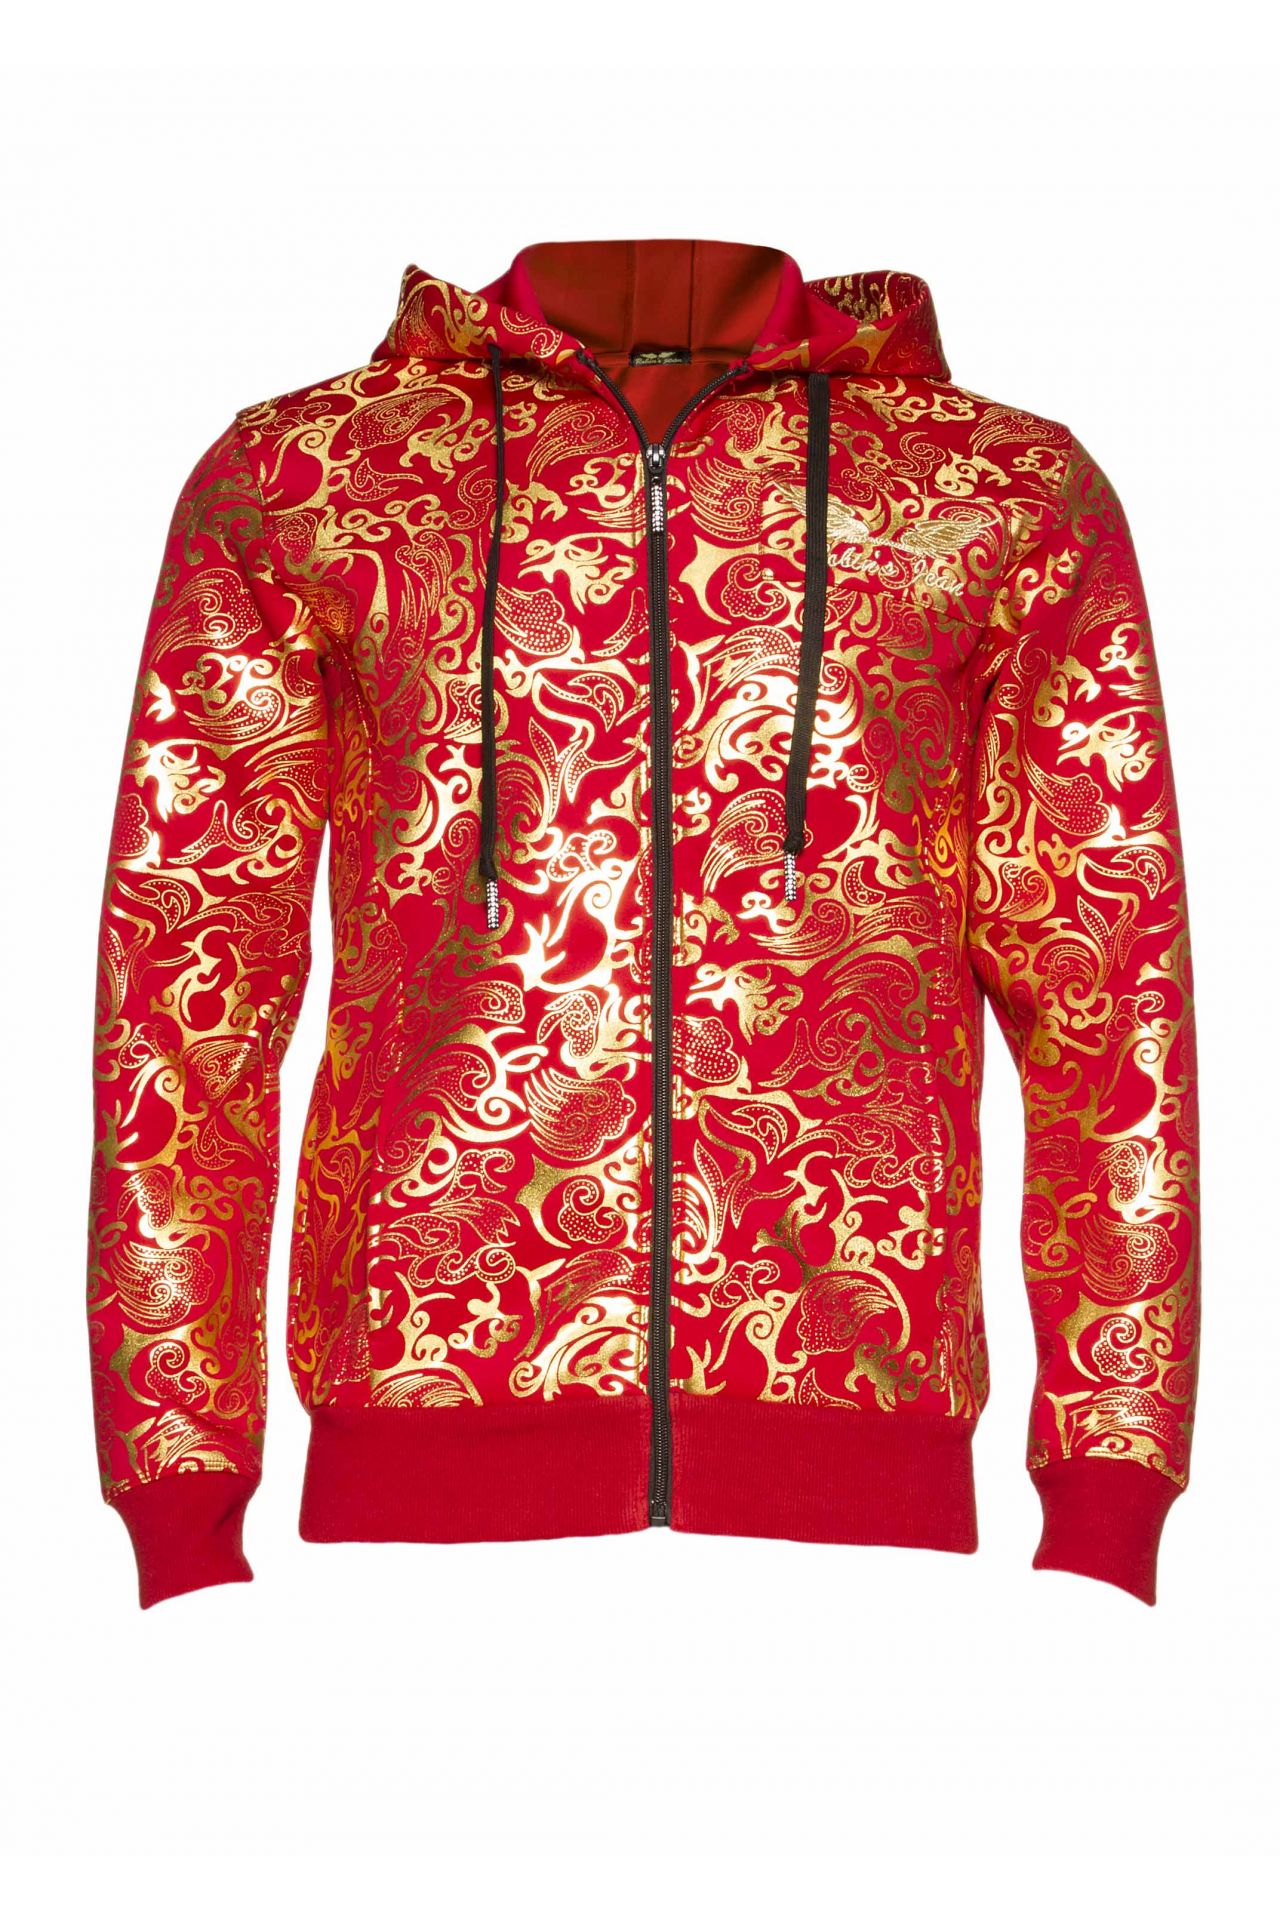 CLOUDS TRACK JACKET HOODIE IN RED AND GOLD